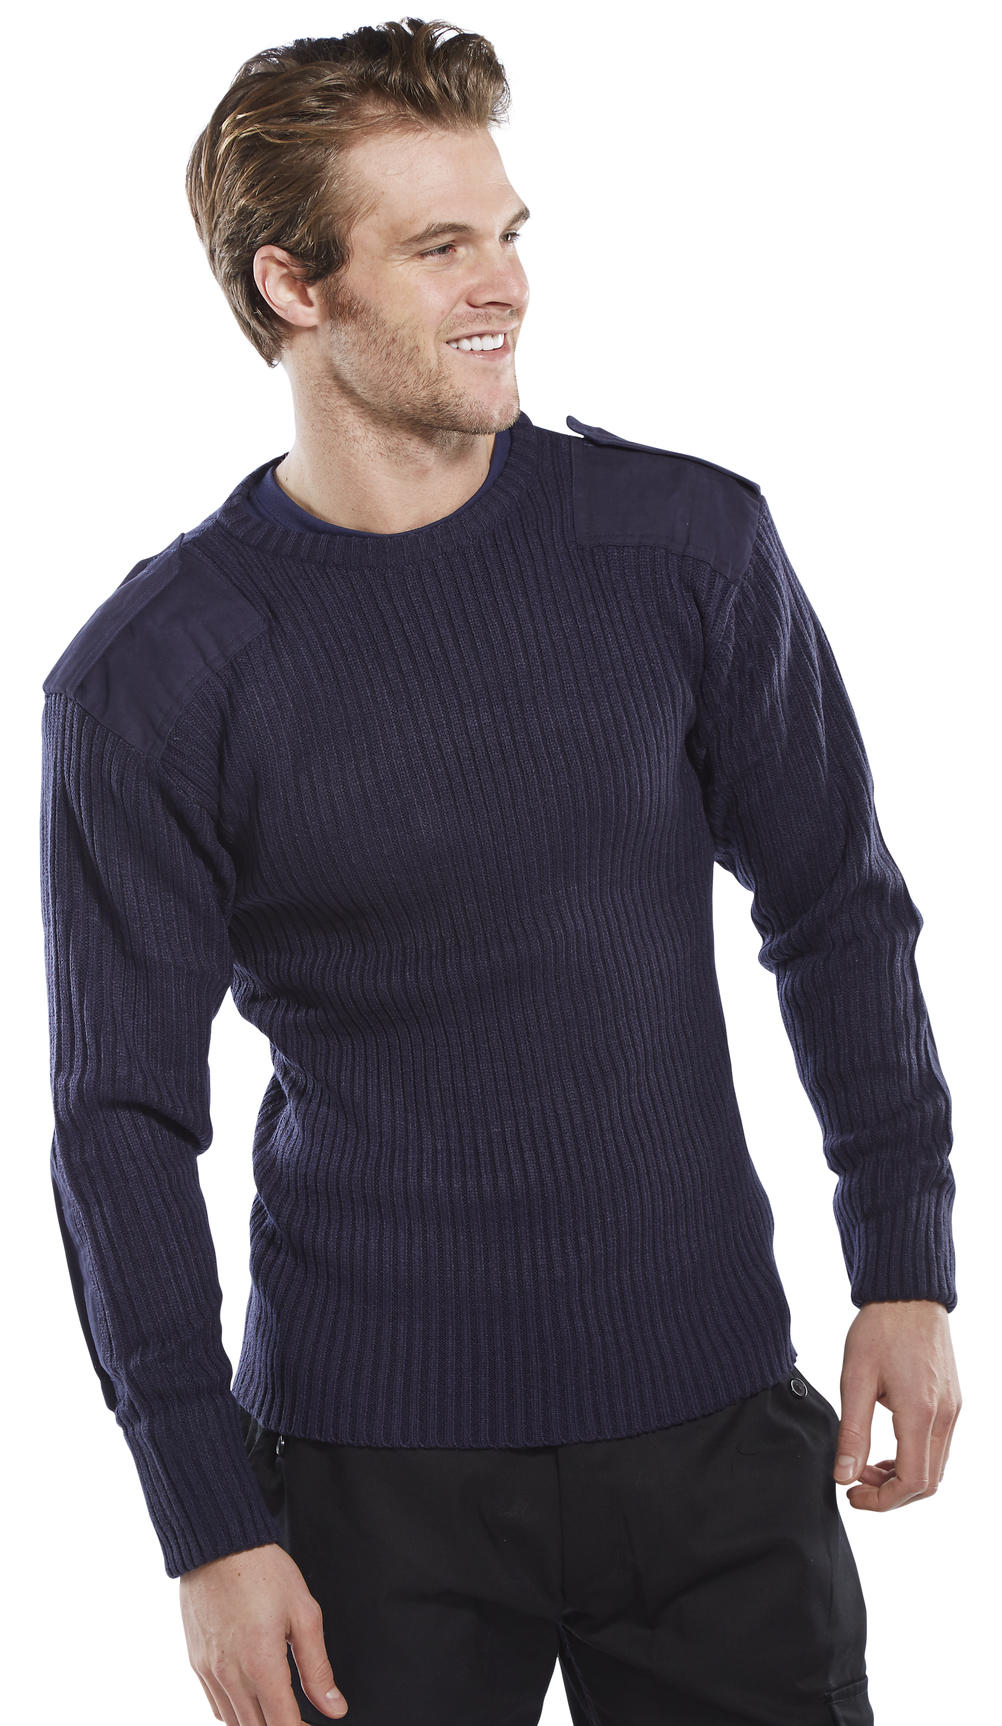 MILITARY STYLE CREW-NECK SWEATER NAVY BLUE